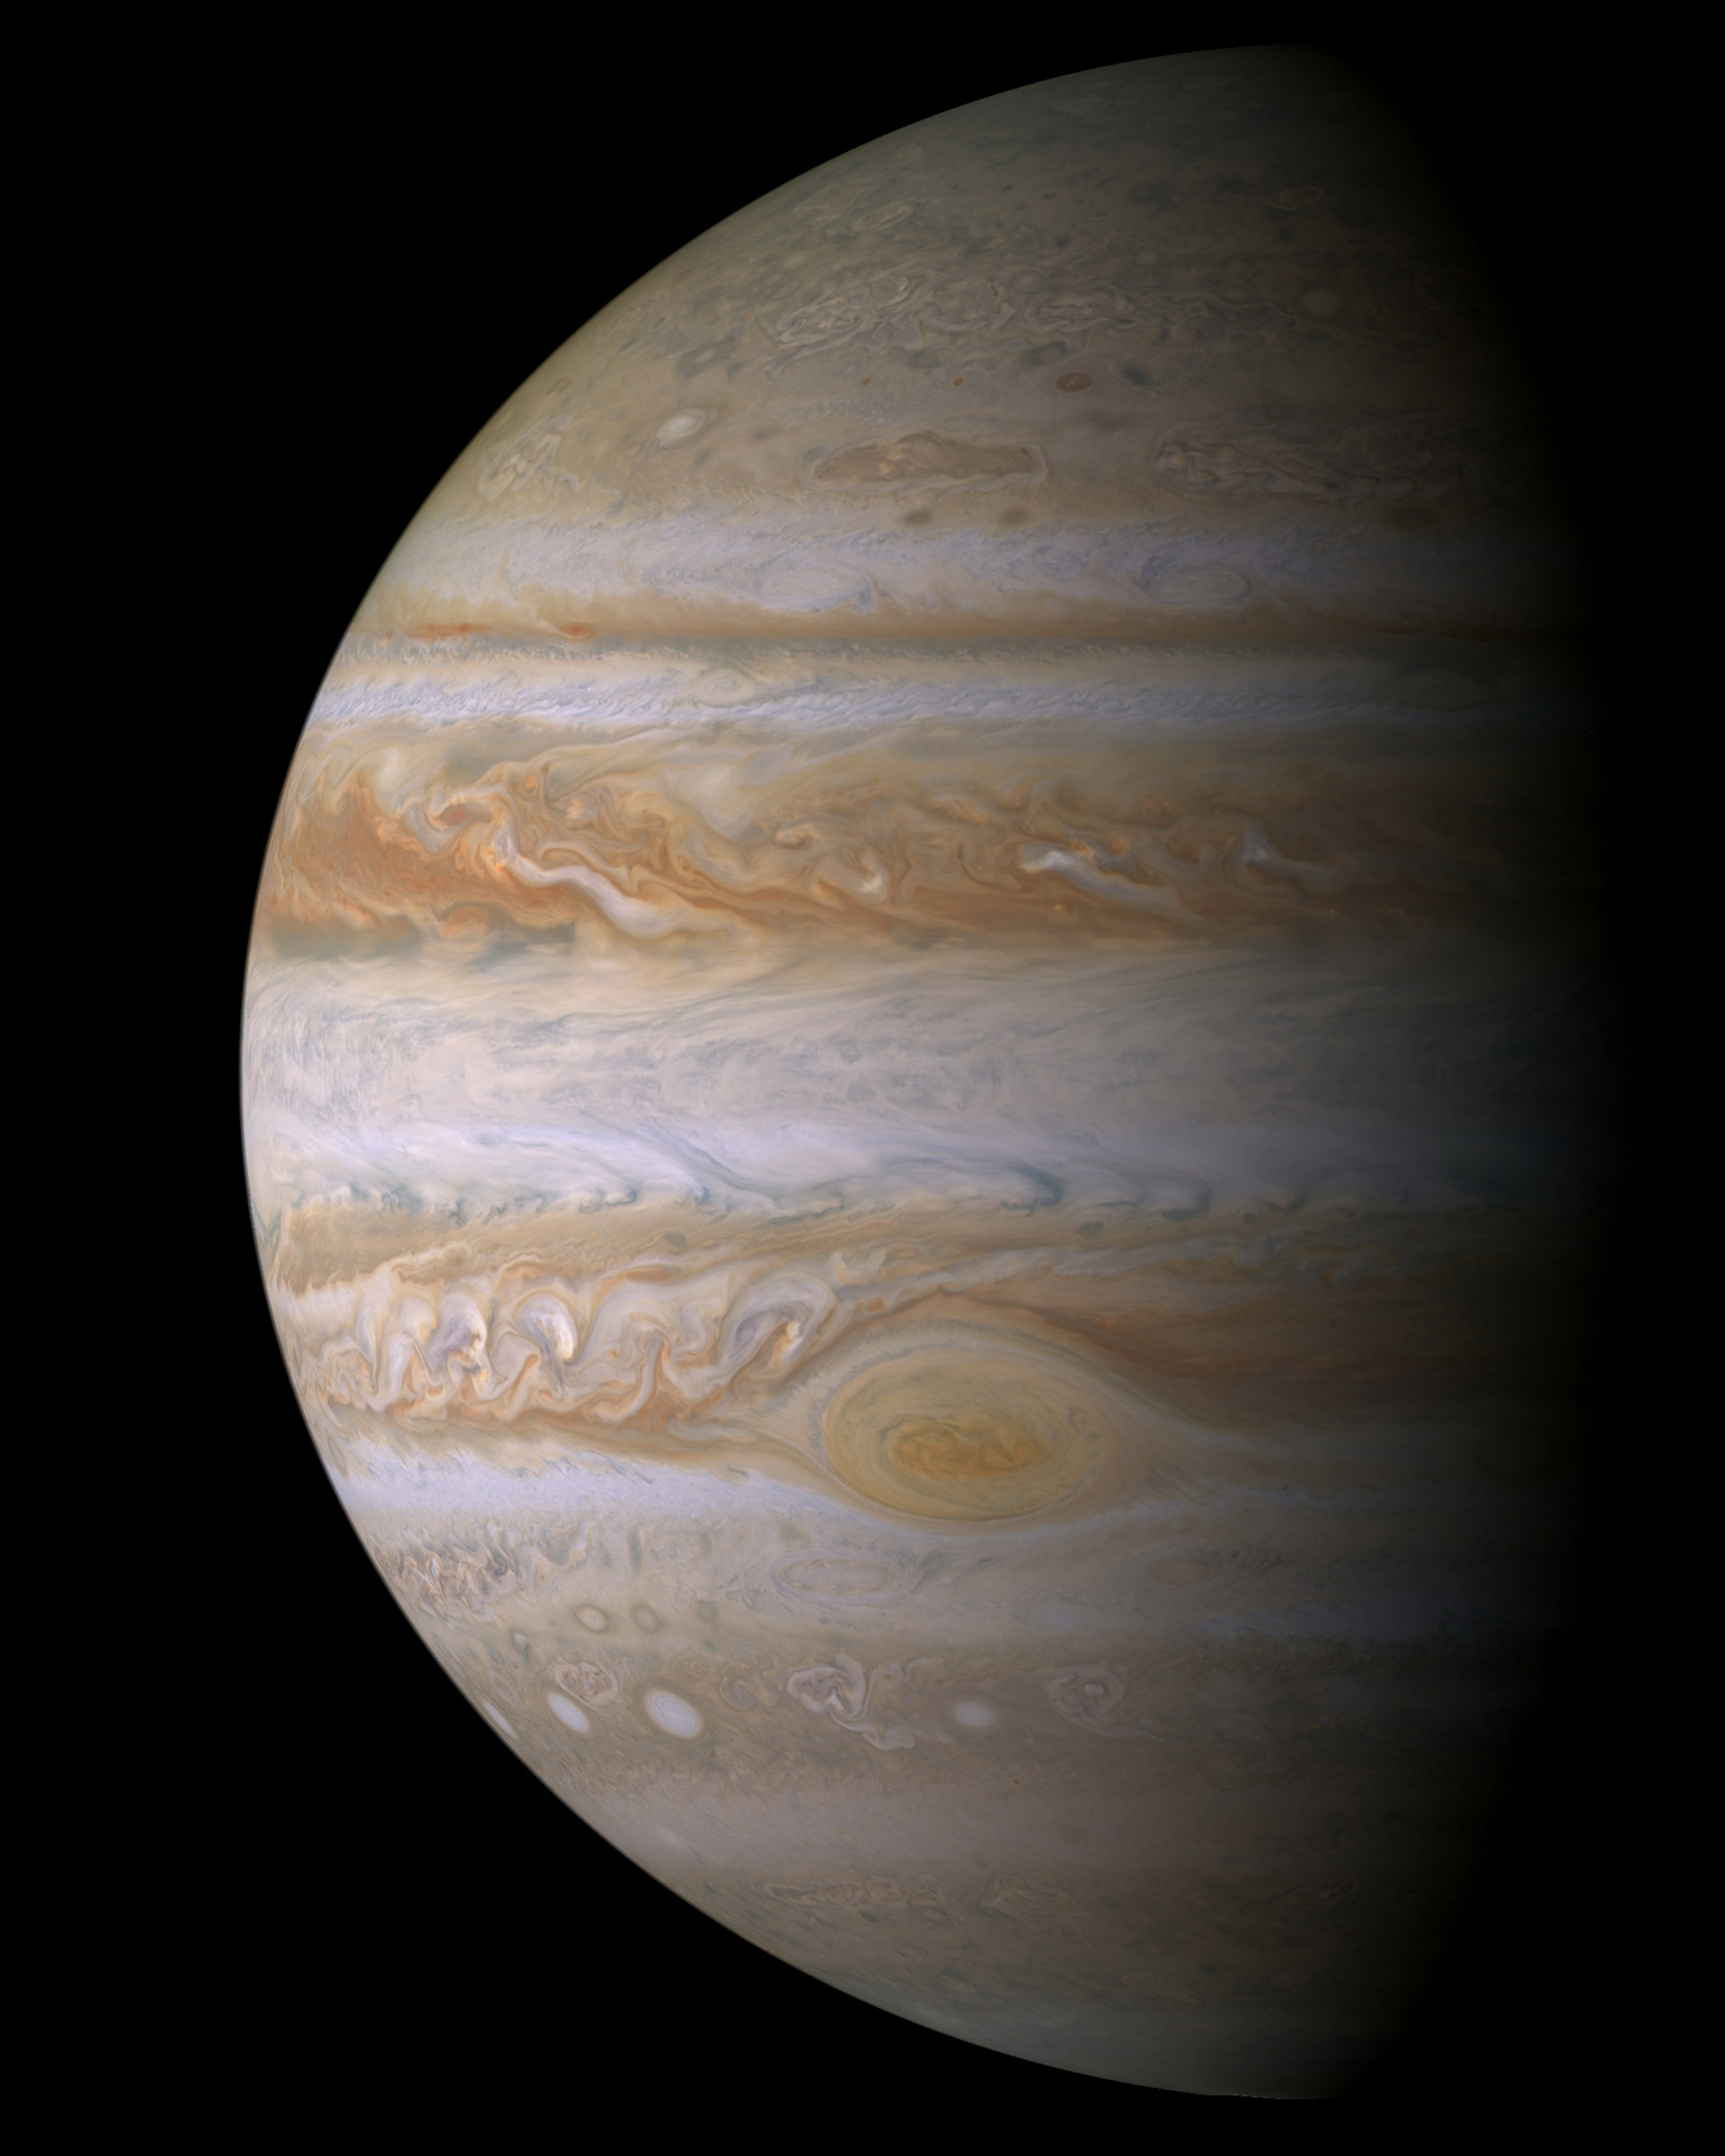 This true color mosaic of Jupiter was constructed from images taken by the narrow angle camera onboard NASA’s Cassini spacecraft in 2000. Photo: NASA/JPL/Space Science Institute